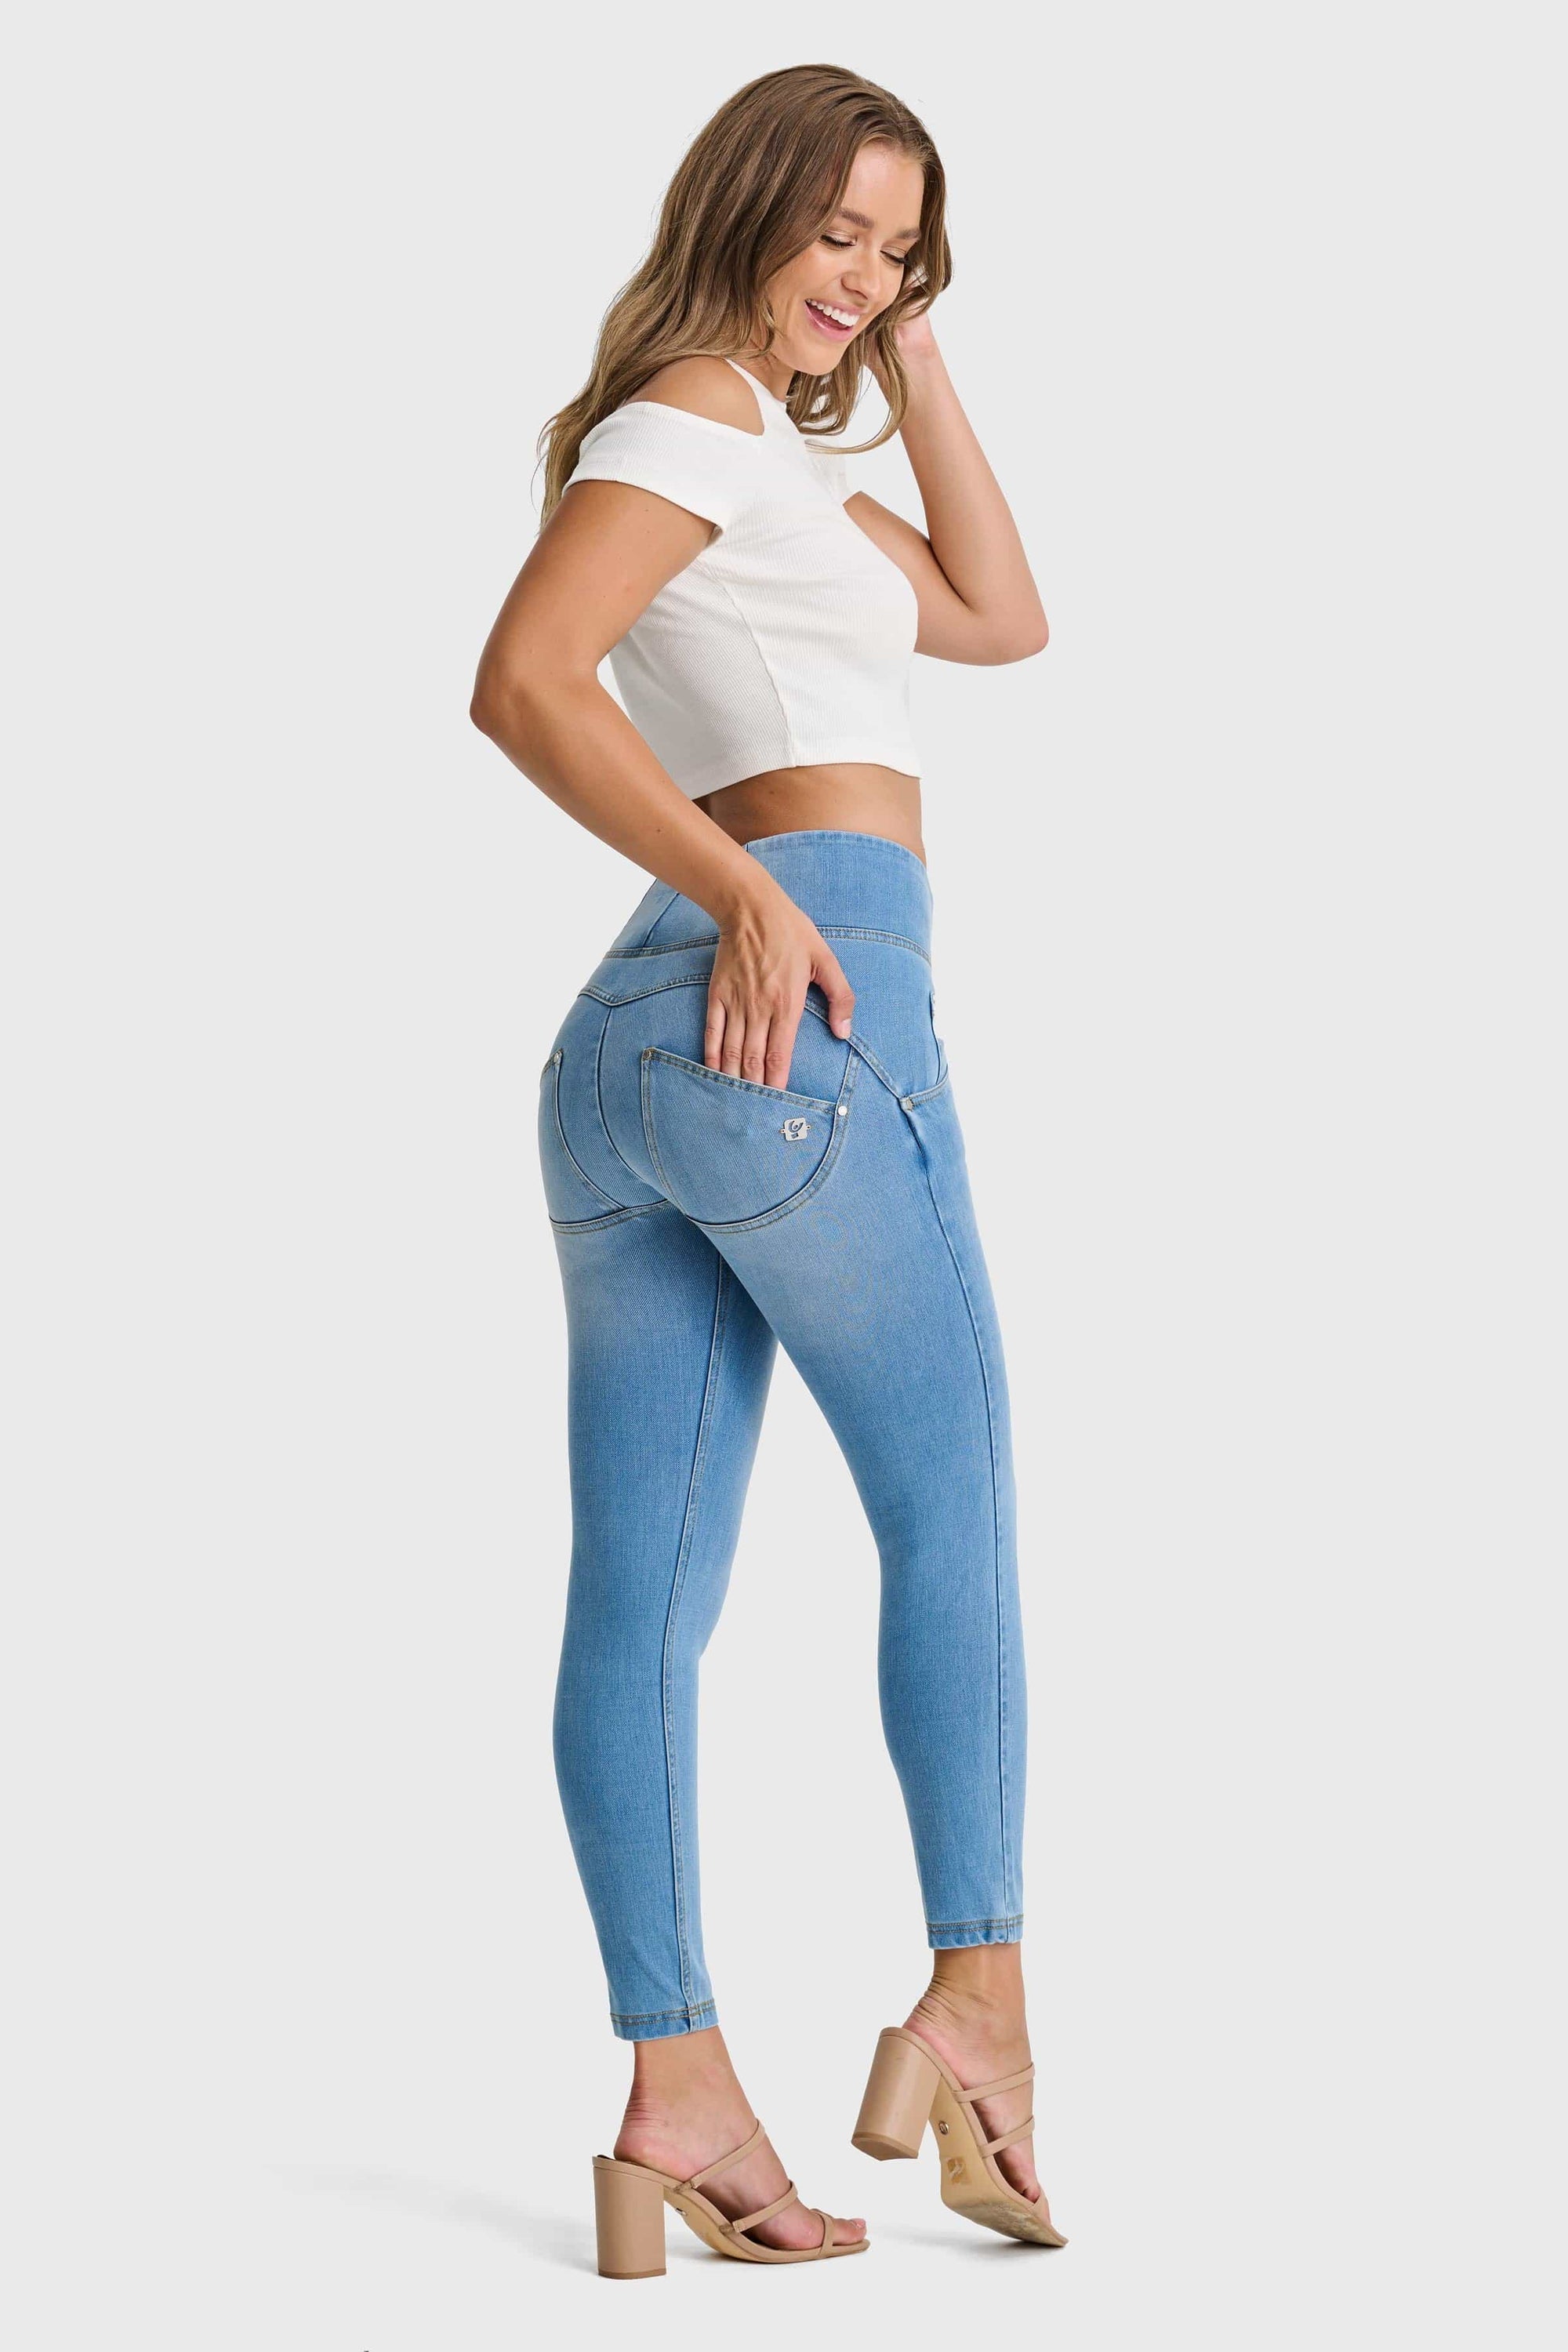 WR.UP® Snug Jeans - High Waisted - 7/8 Length - Light Blue + Yellow Stitching 5